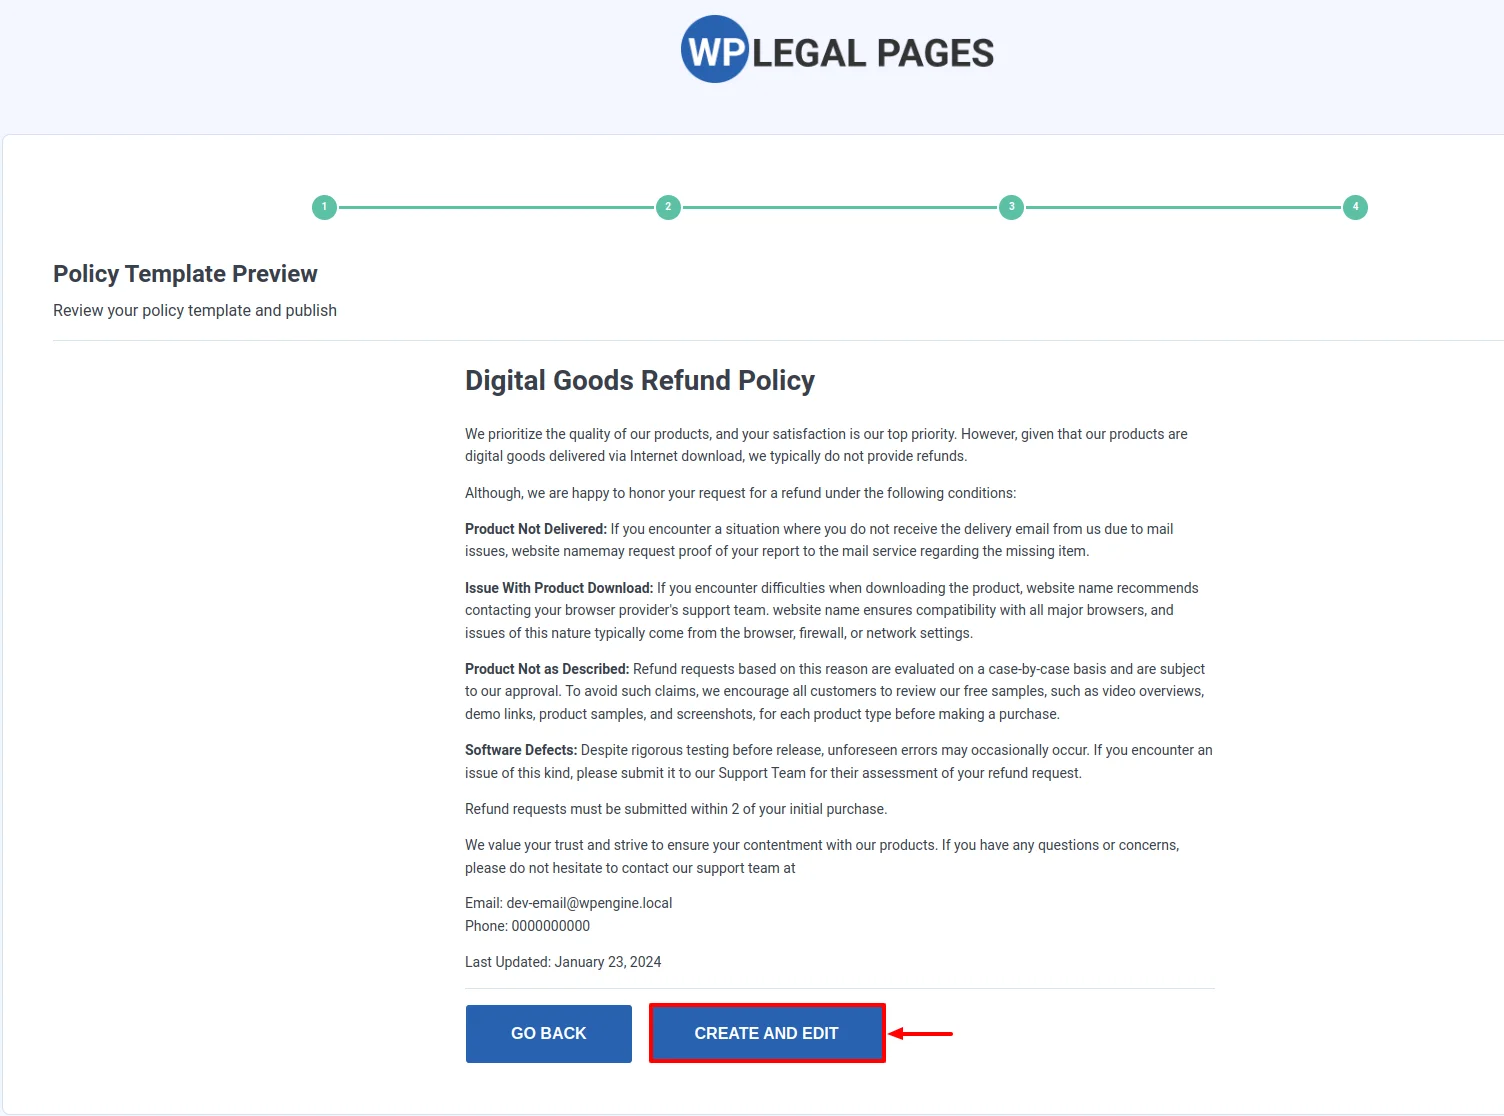 Digital goods refund policy template preview